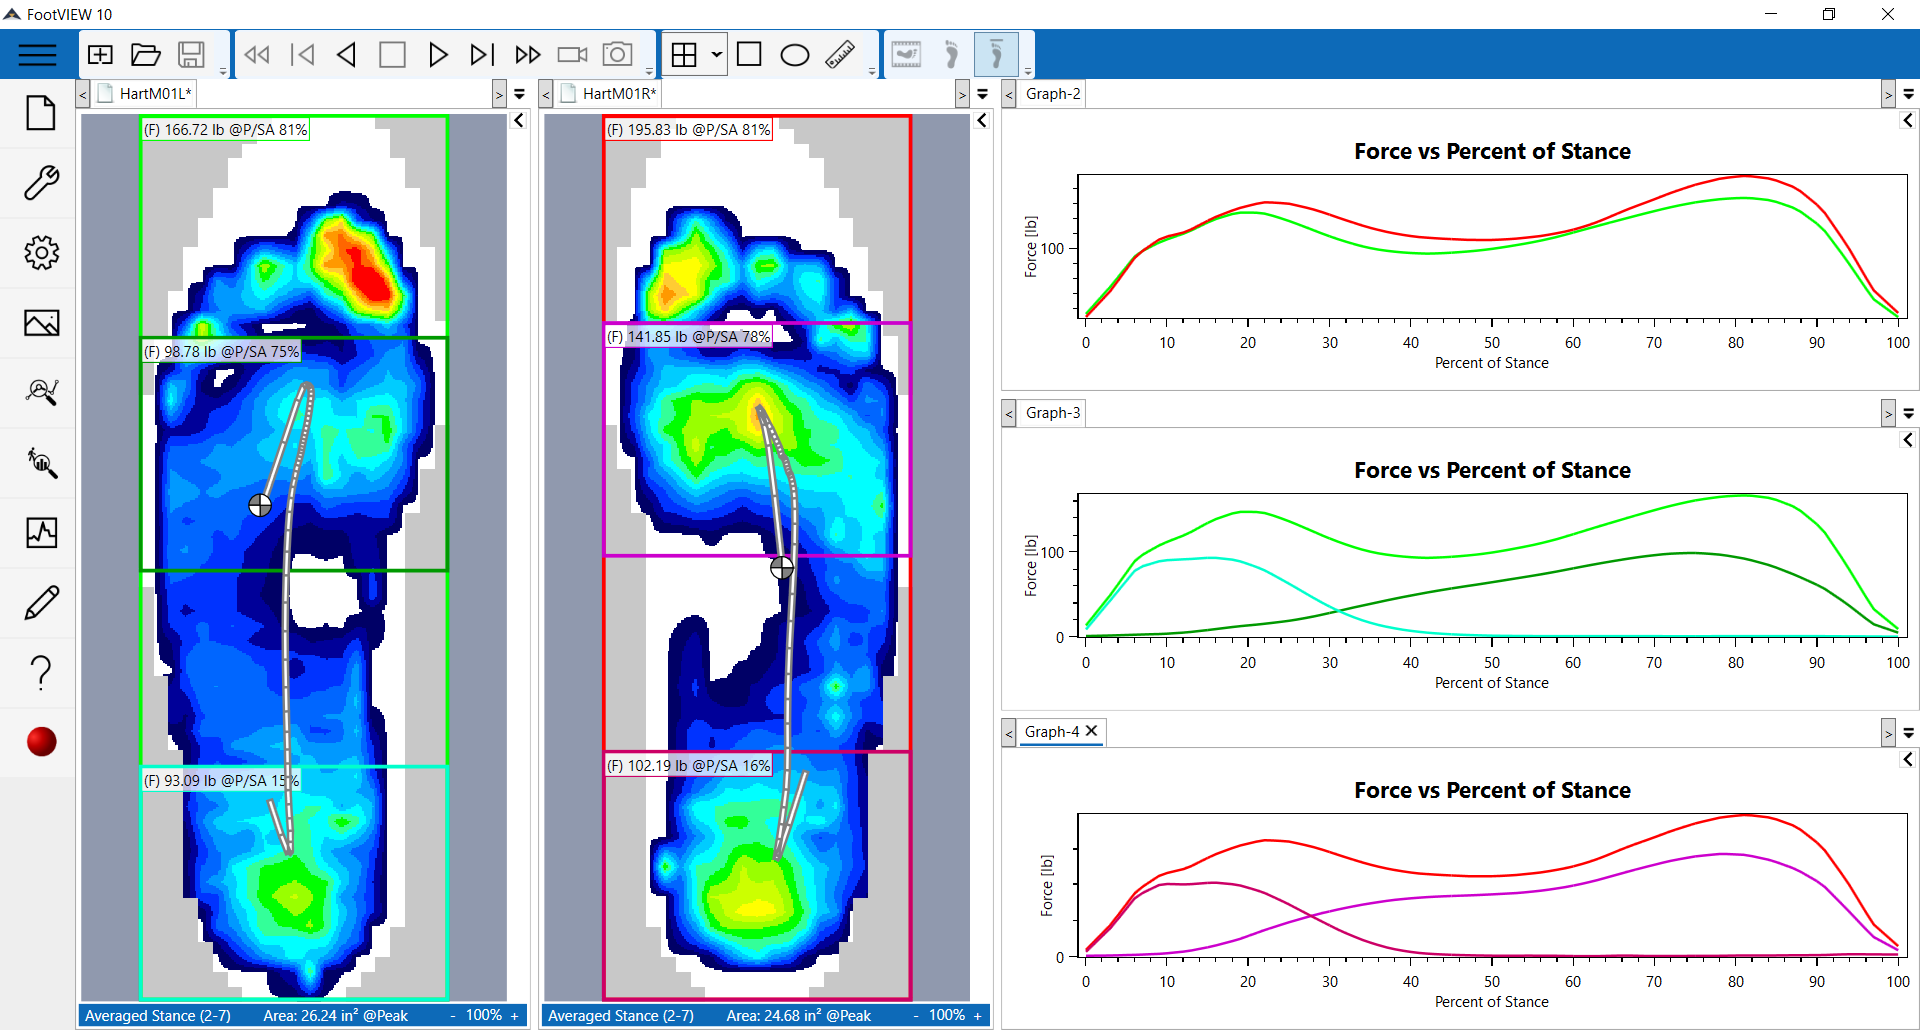 Tekscan software allows you to segment the foot for a more detailed foot function analysis and identifies the area of highest pressure.